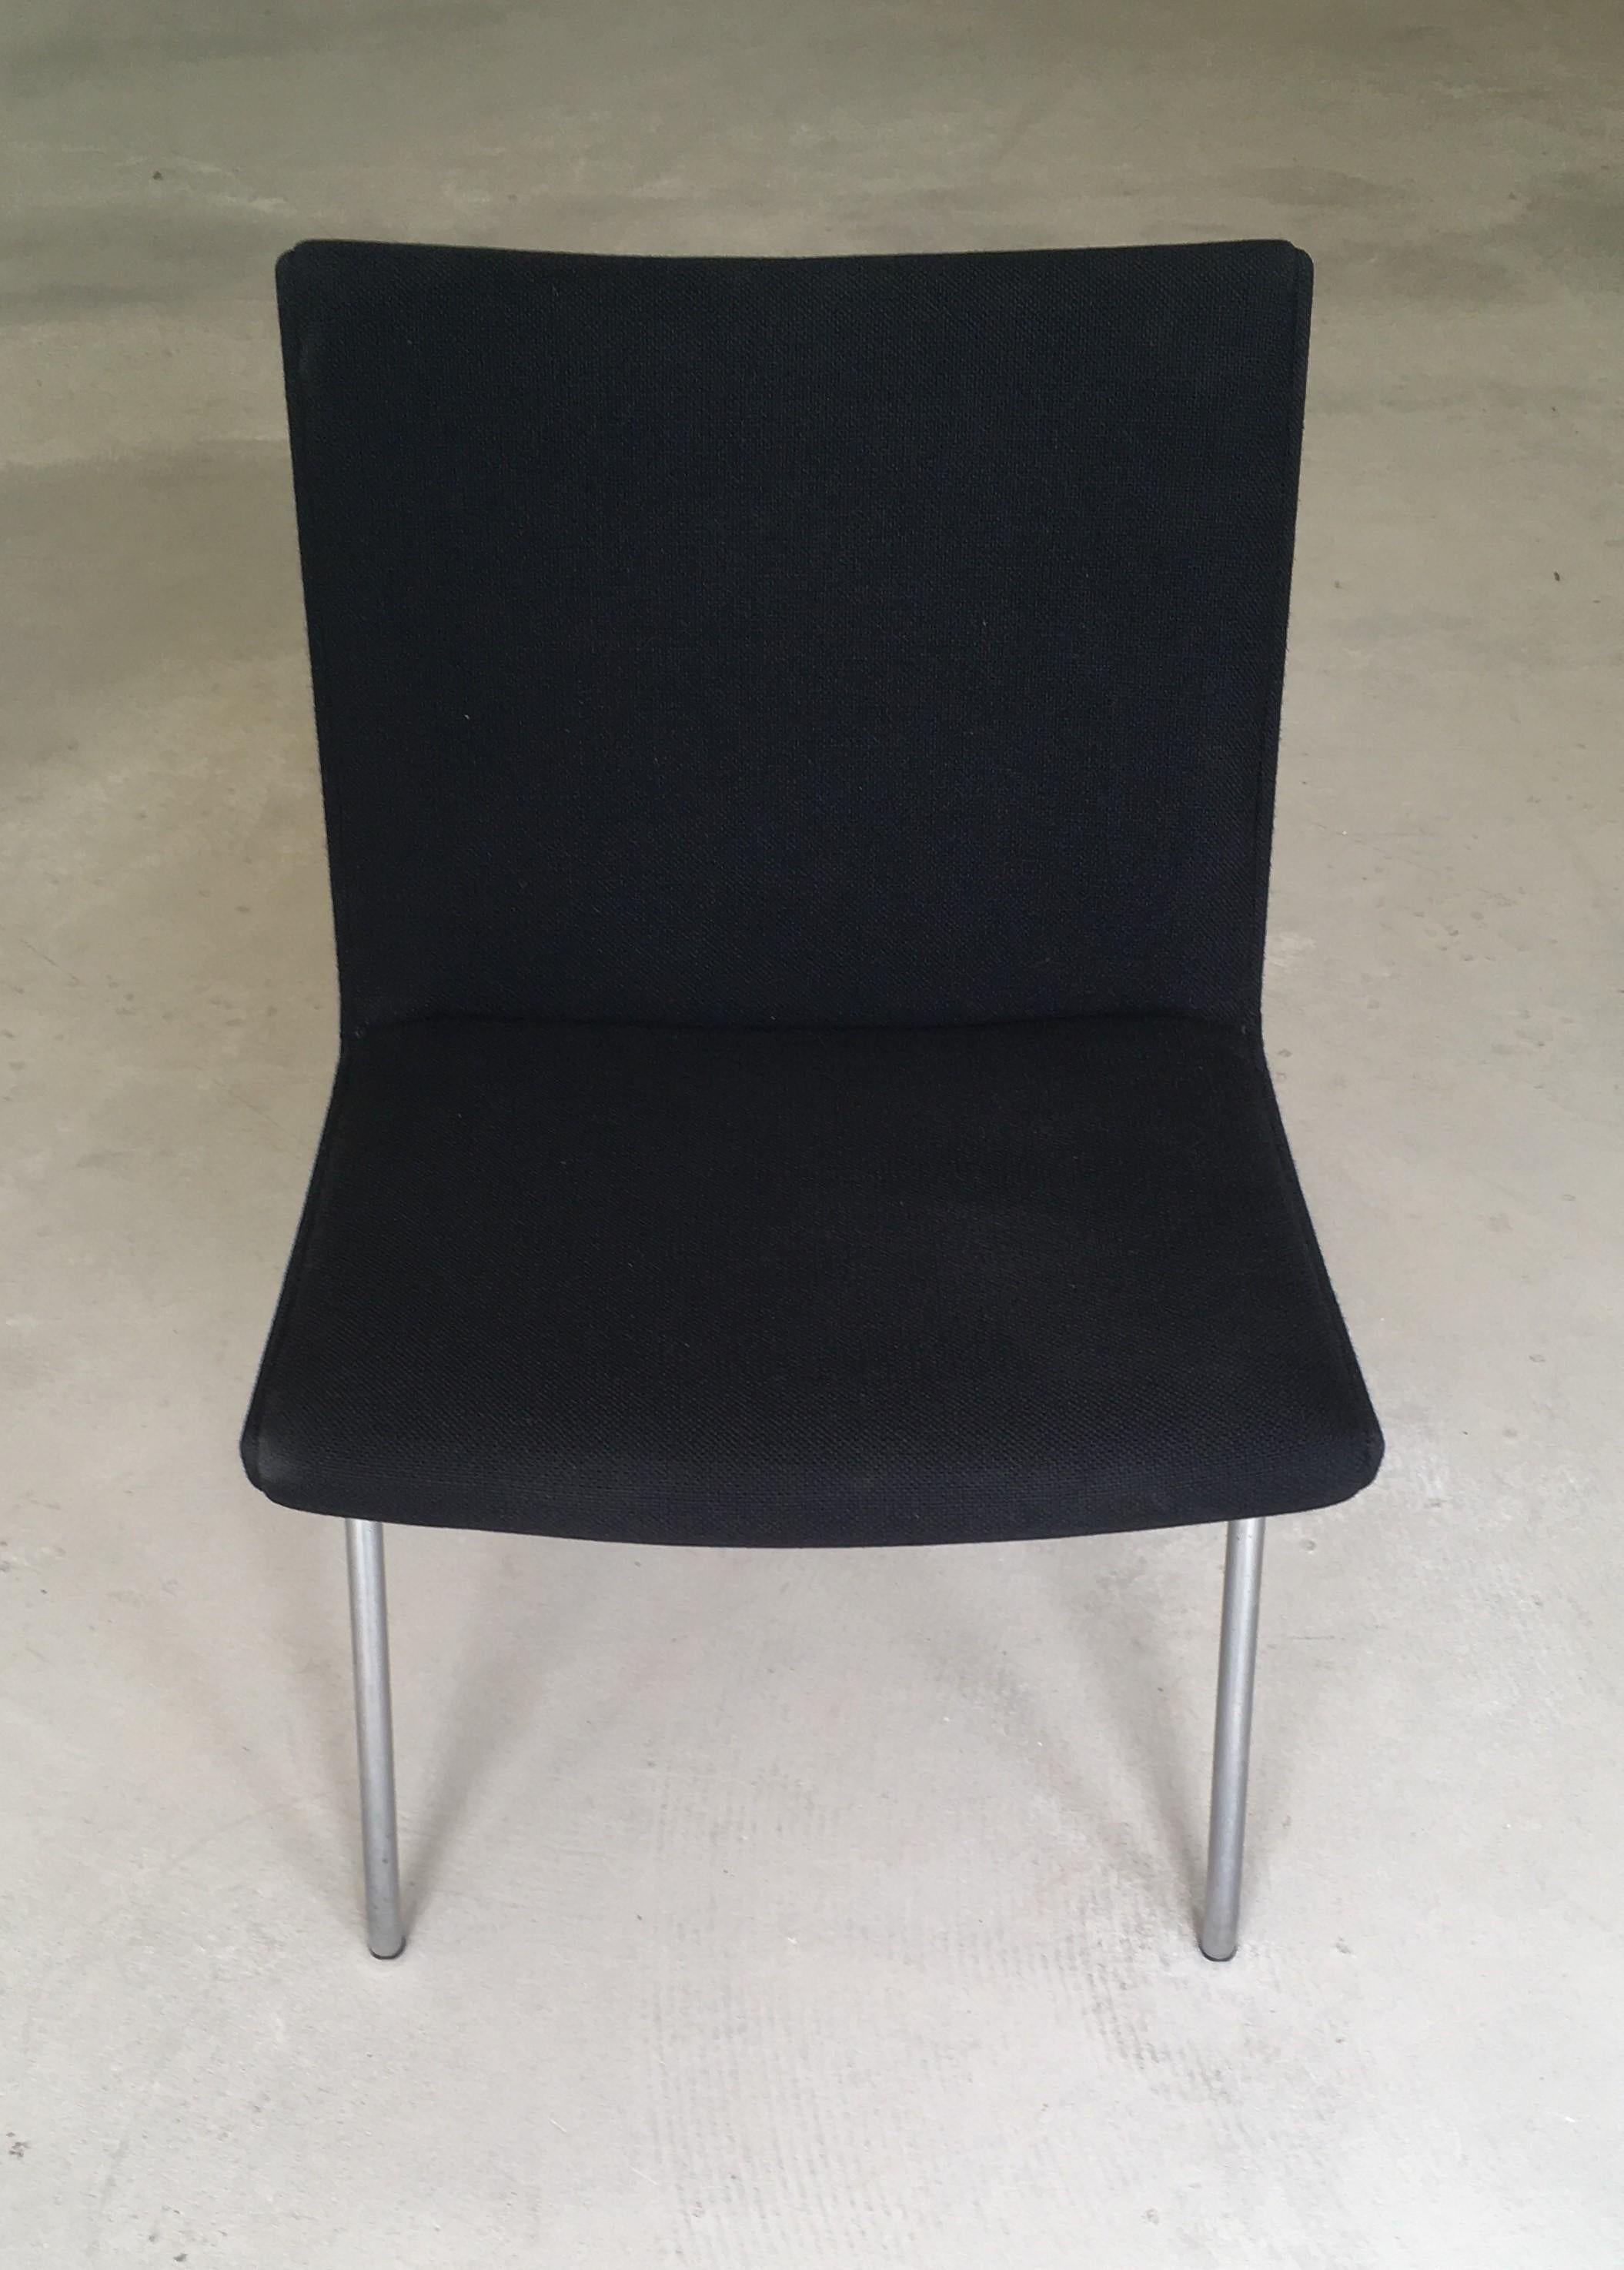 Hans Wegner AP38 'Airport' chair by A.P. Stolen.

Exceptional modern chair. of it´s time Designed in 1958, on tubular-steel frames. Seat have been reupholstered with black Kvadrat Hallingdal 65. 

Although not designed specifically for airports this